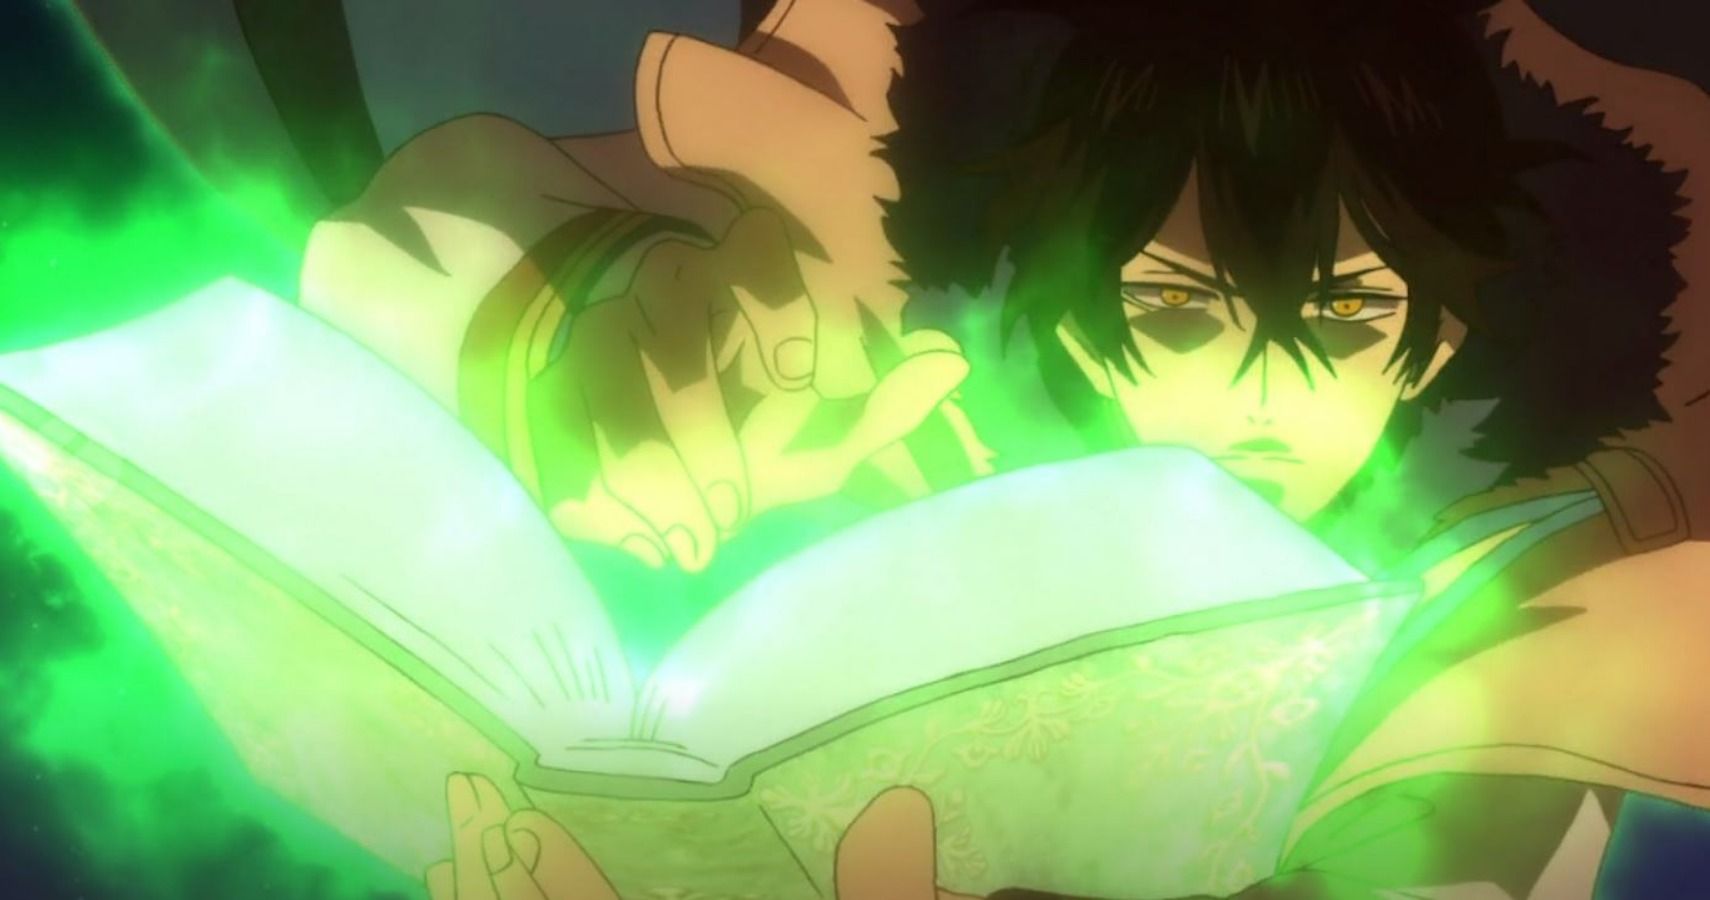 Black Clover: Yuno’s 10 Most Powerful Magic Techniques, Ranked